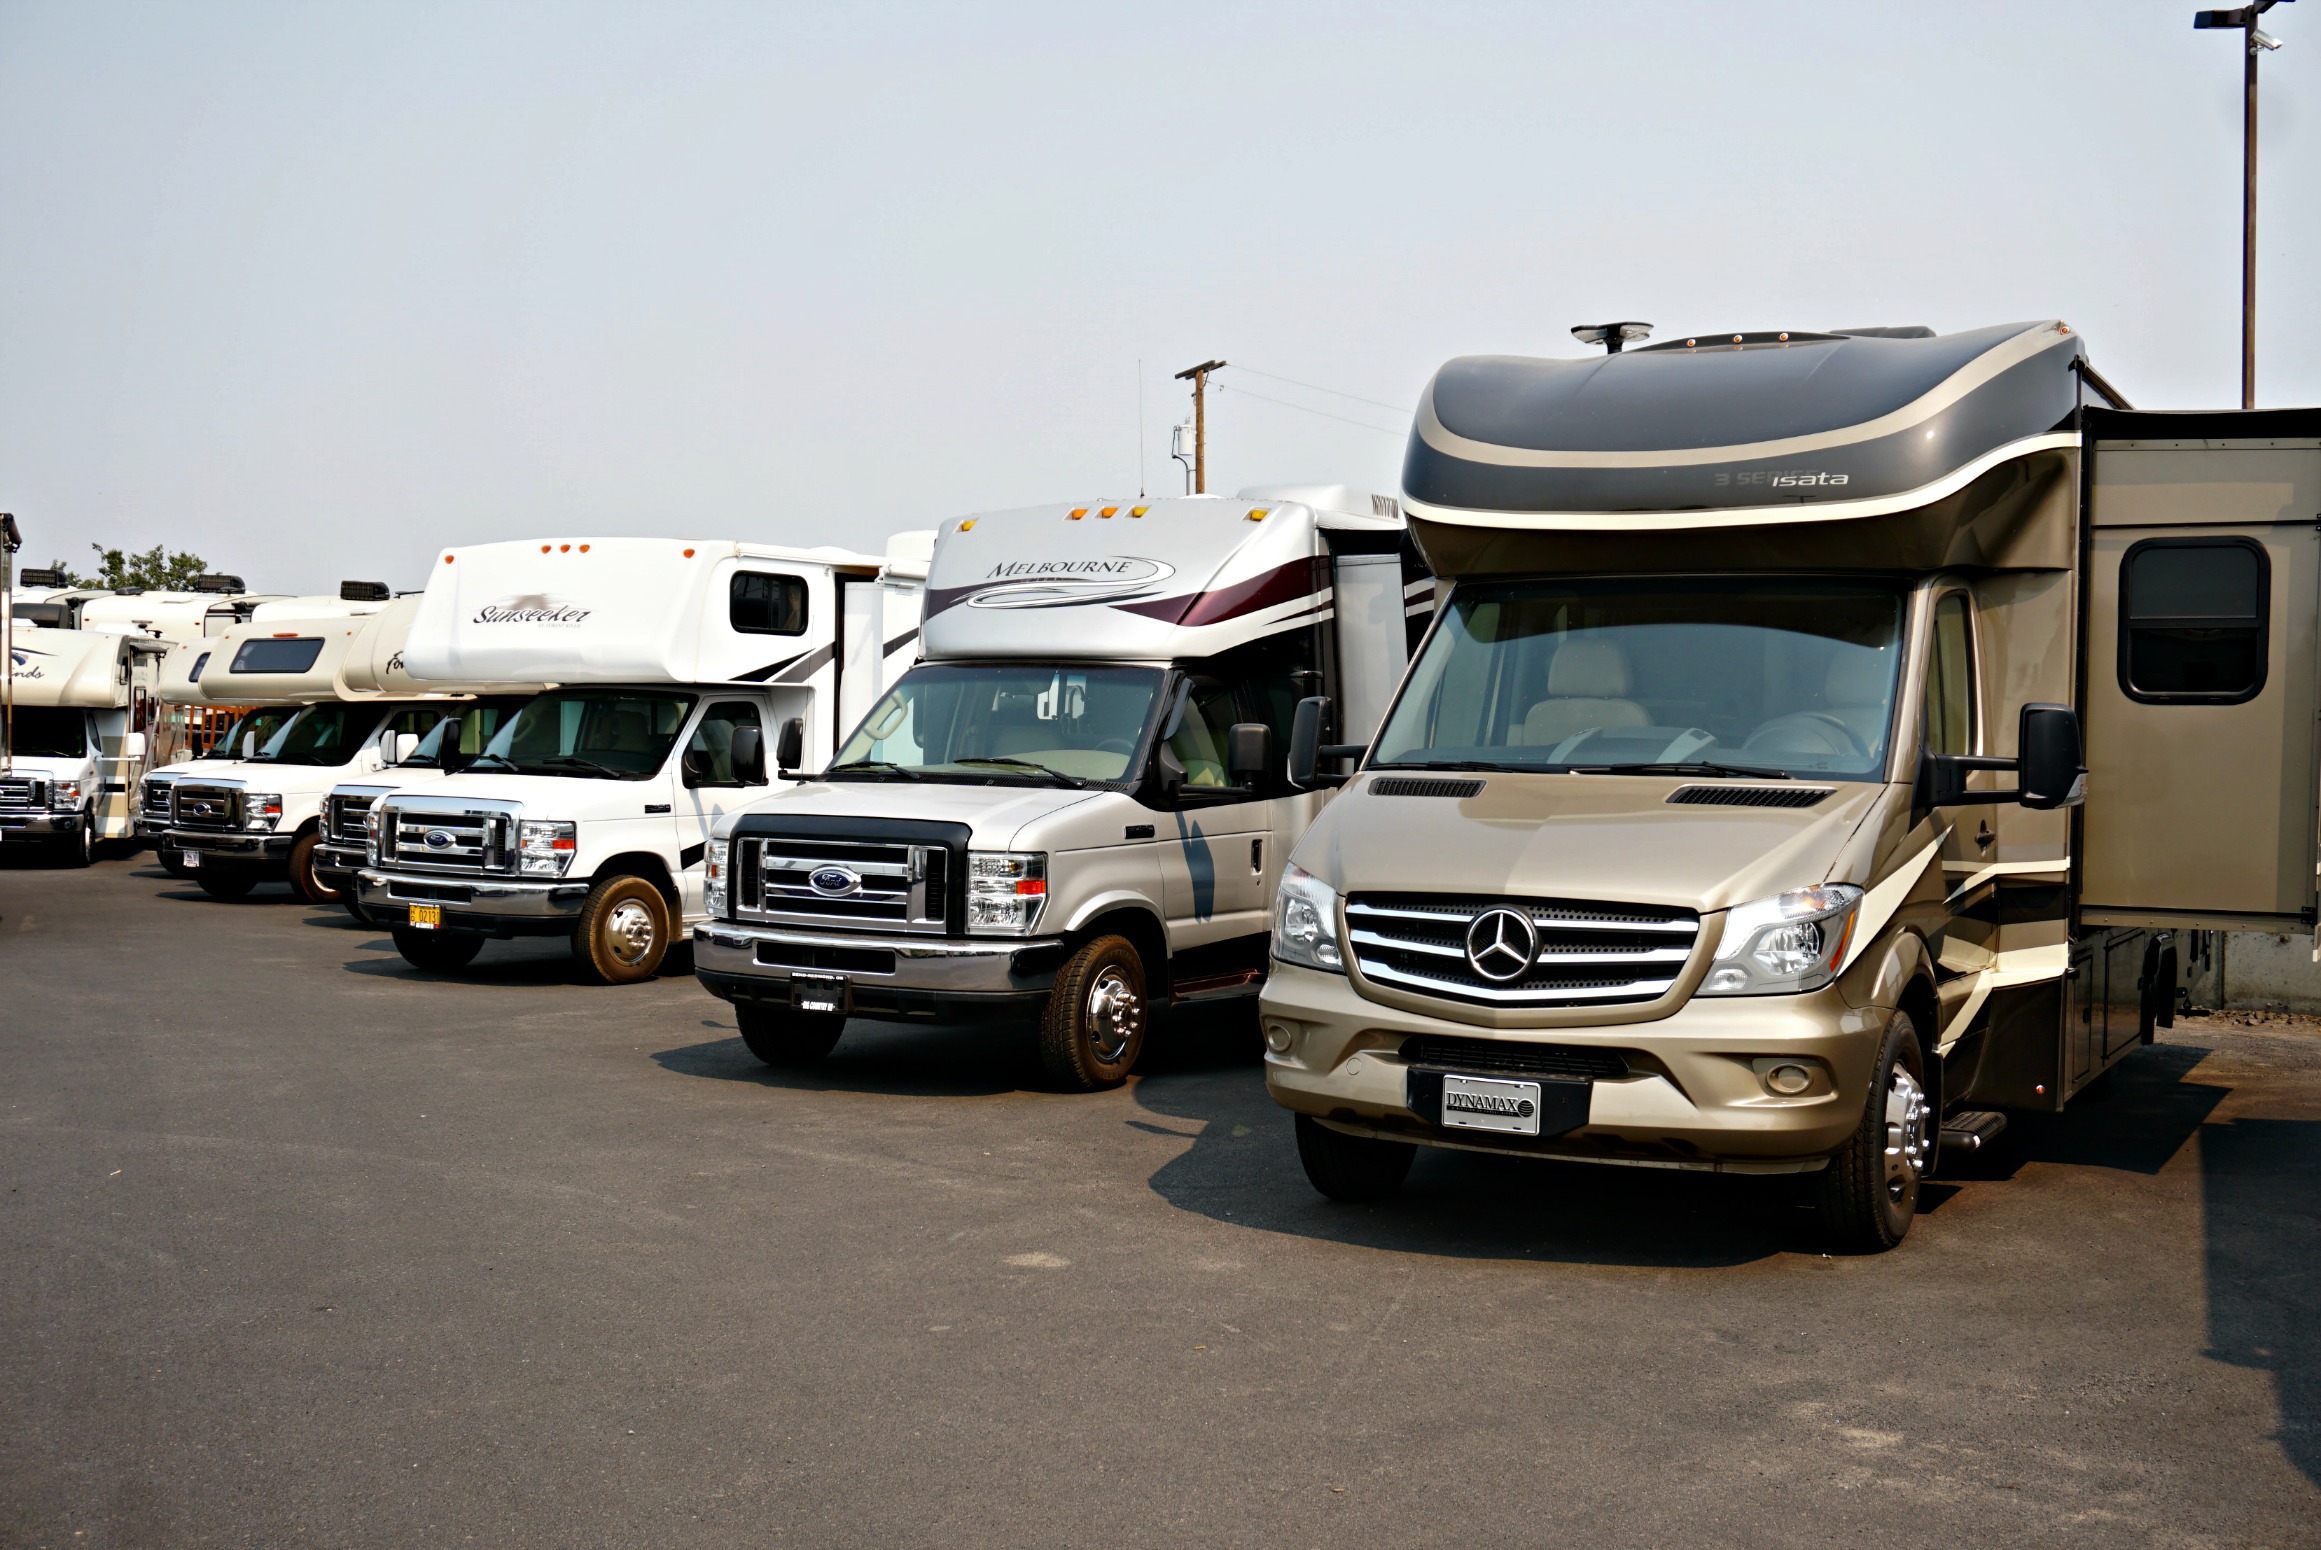 RVs on the lot